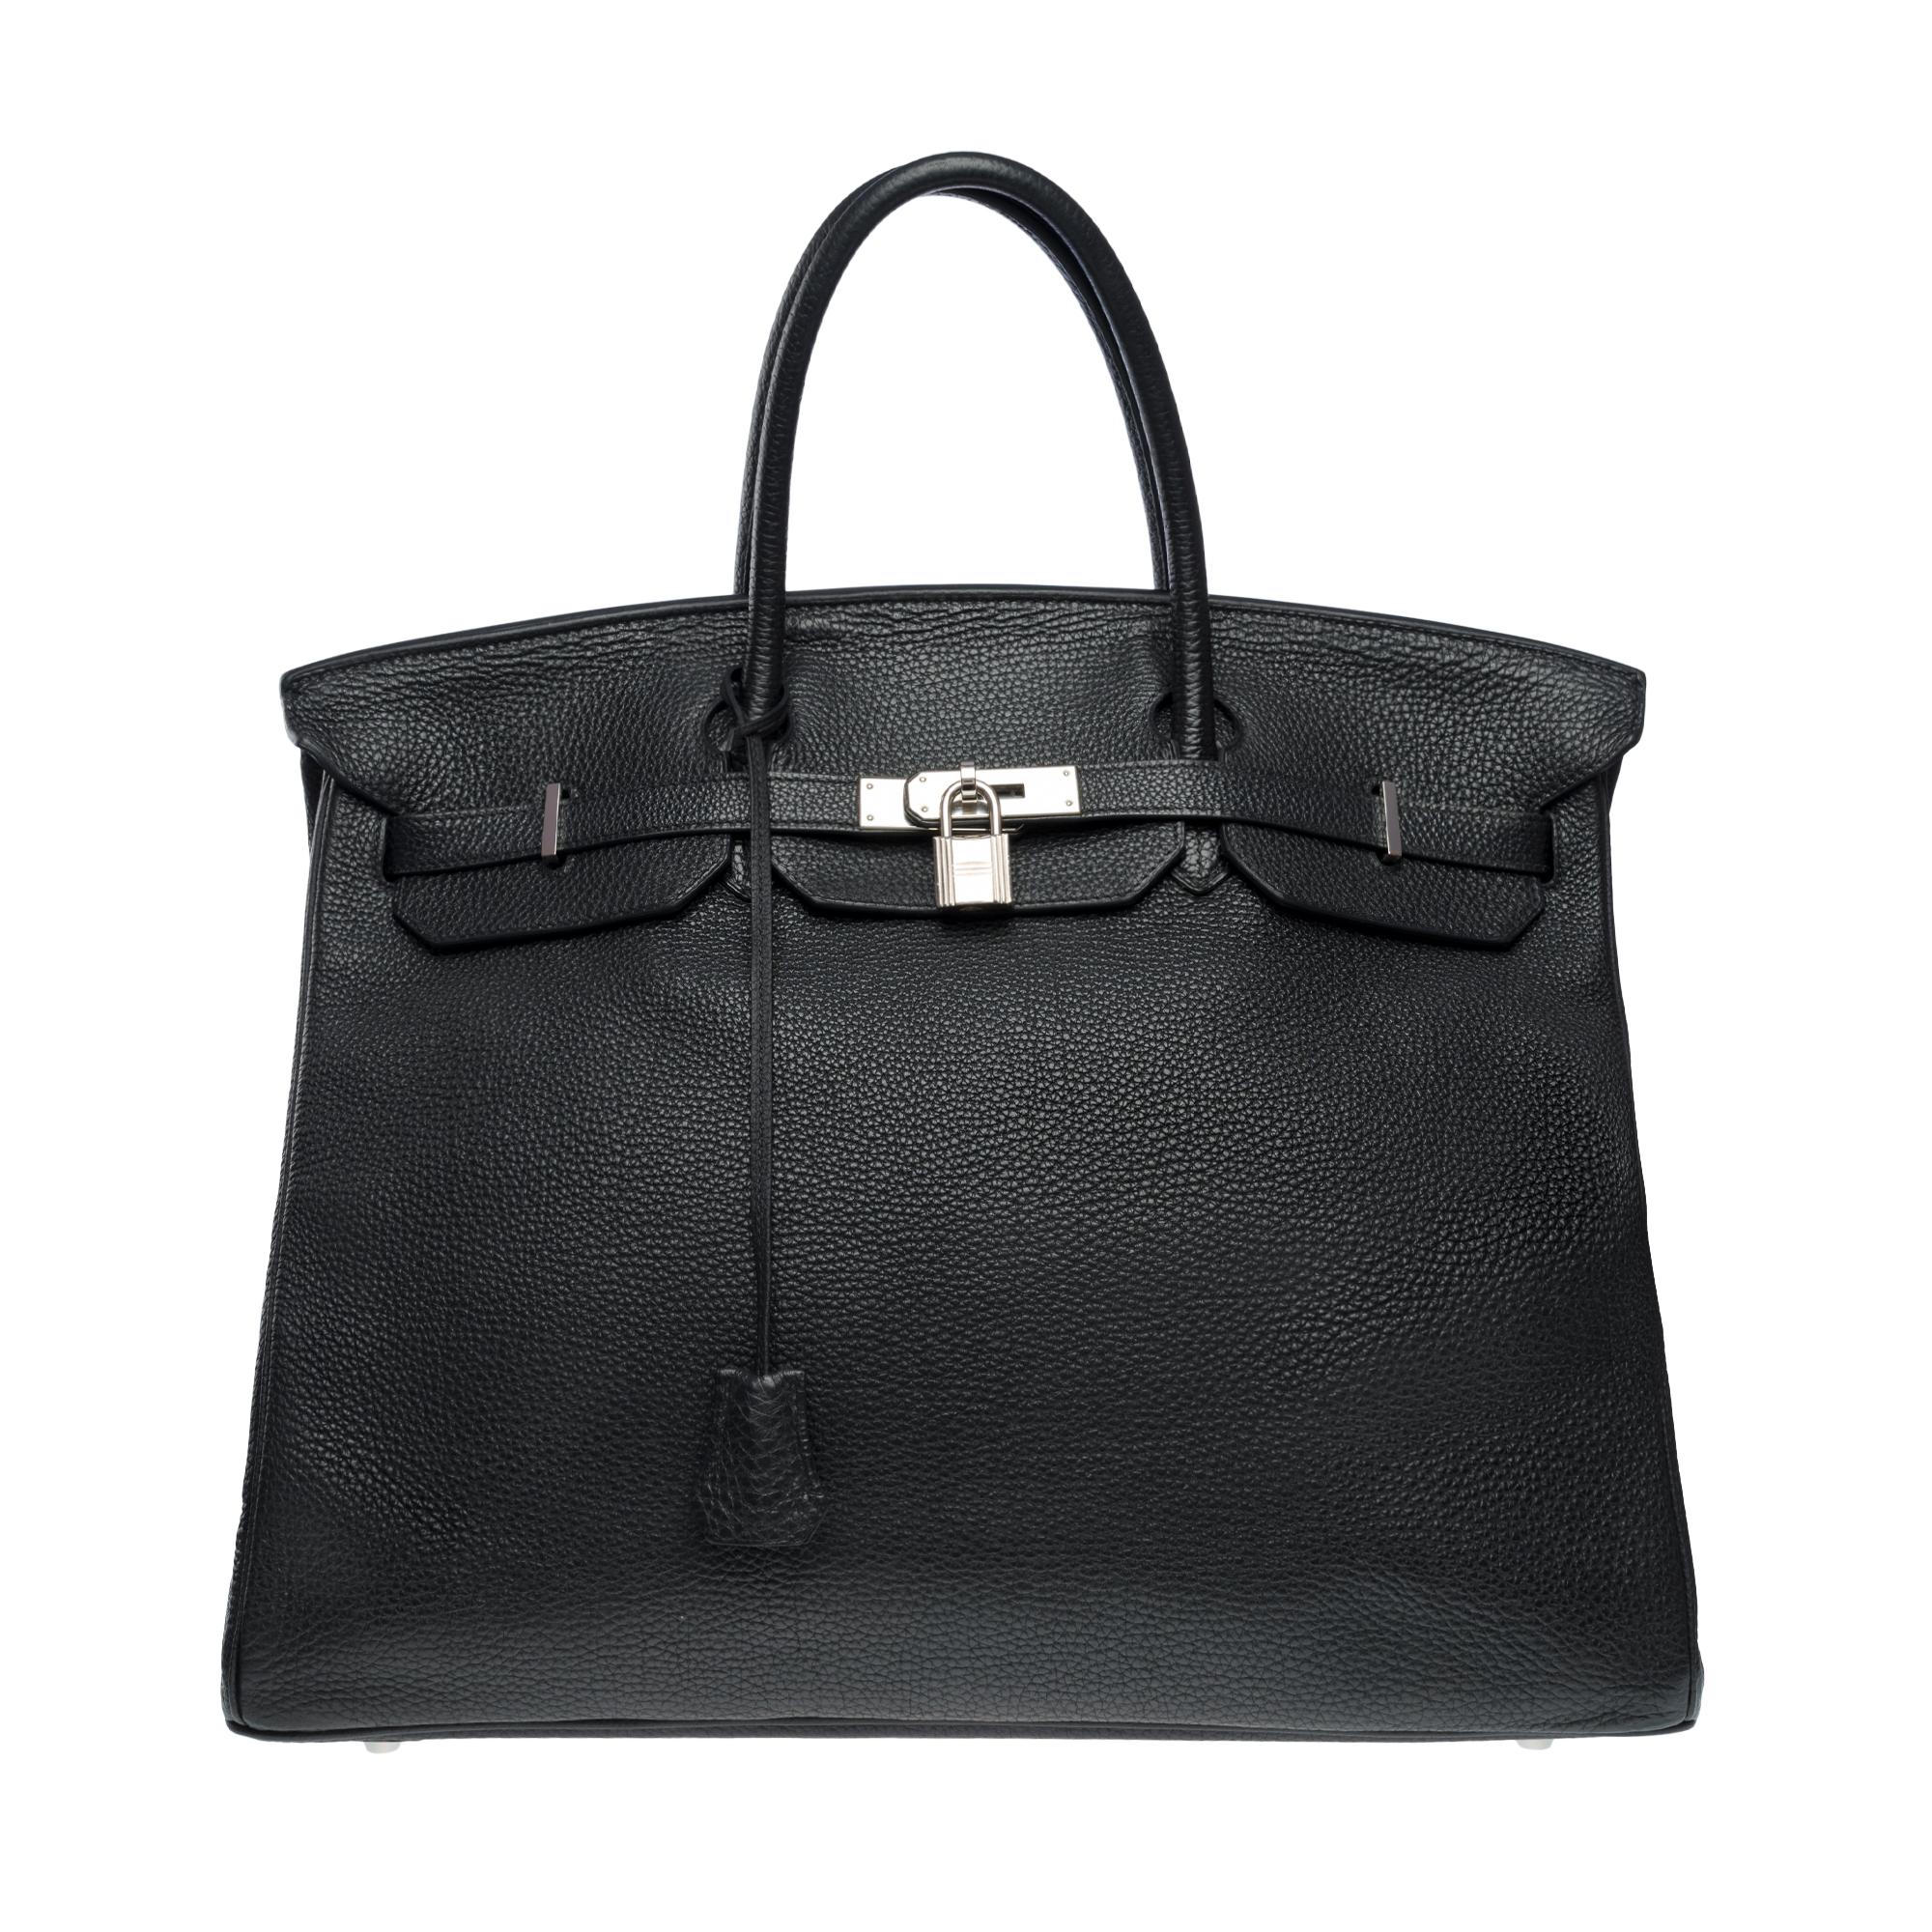 Beautiful​ ​Hermes​ ​Birkin​ ​40​ ​cm​ ​handbag​ ​in​ ​black​ ​Togo​ ​leather,​ ​palladium​ ​silver​ ​metal​ ​trim,​ ​double​ ​handle​ ​in​ ​black​ ​leather​ ​allowing​ ​a​ ​hand​ ​carry

Flap​ ​closure
Black​ ​leather​ ​inner​ ​lining,​ ​one​